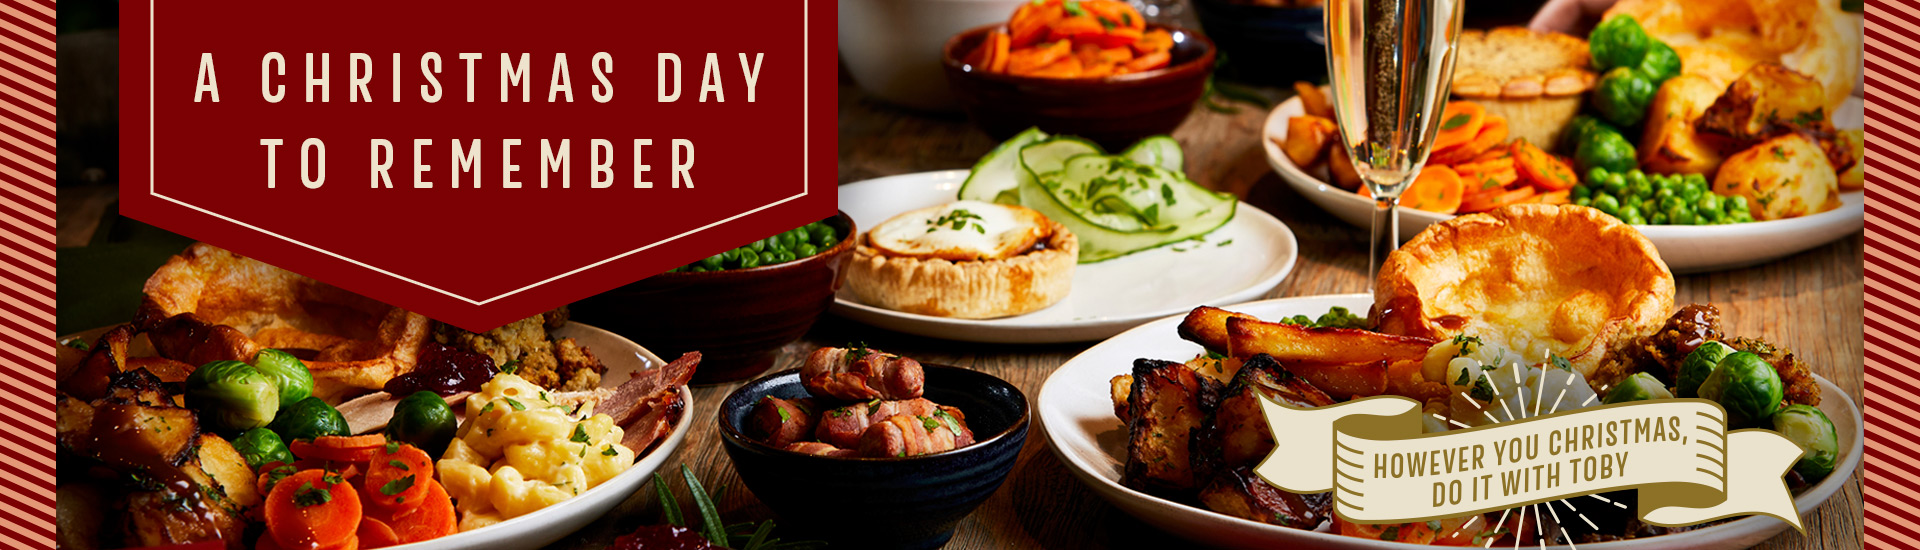 Christmas Day menu at Toby Carvery Oulton Leeds